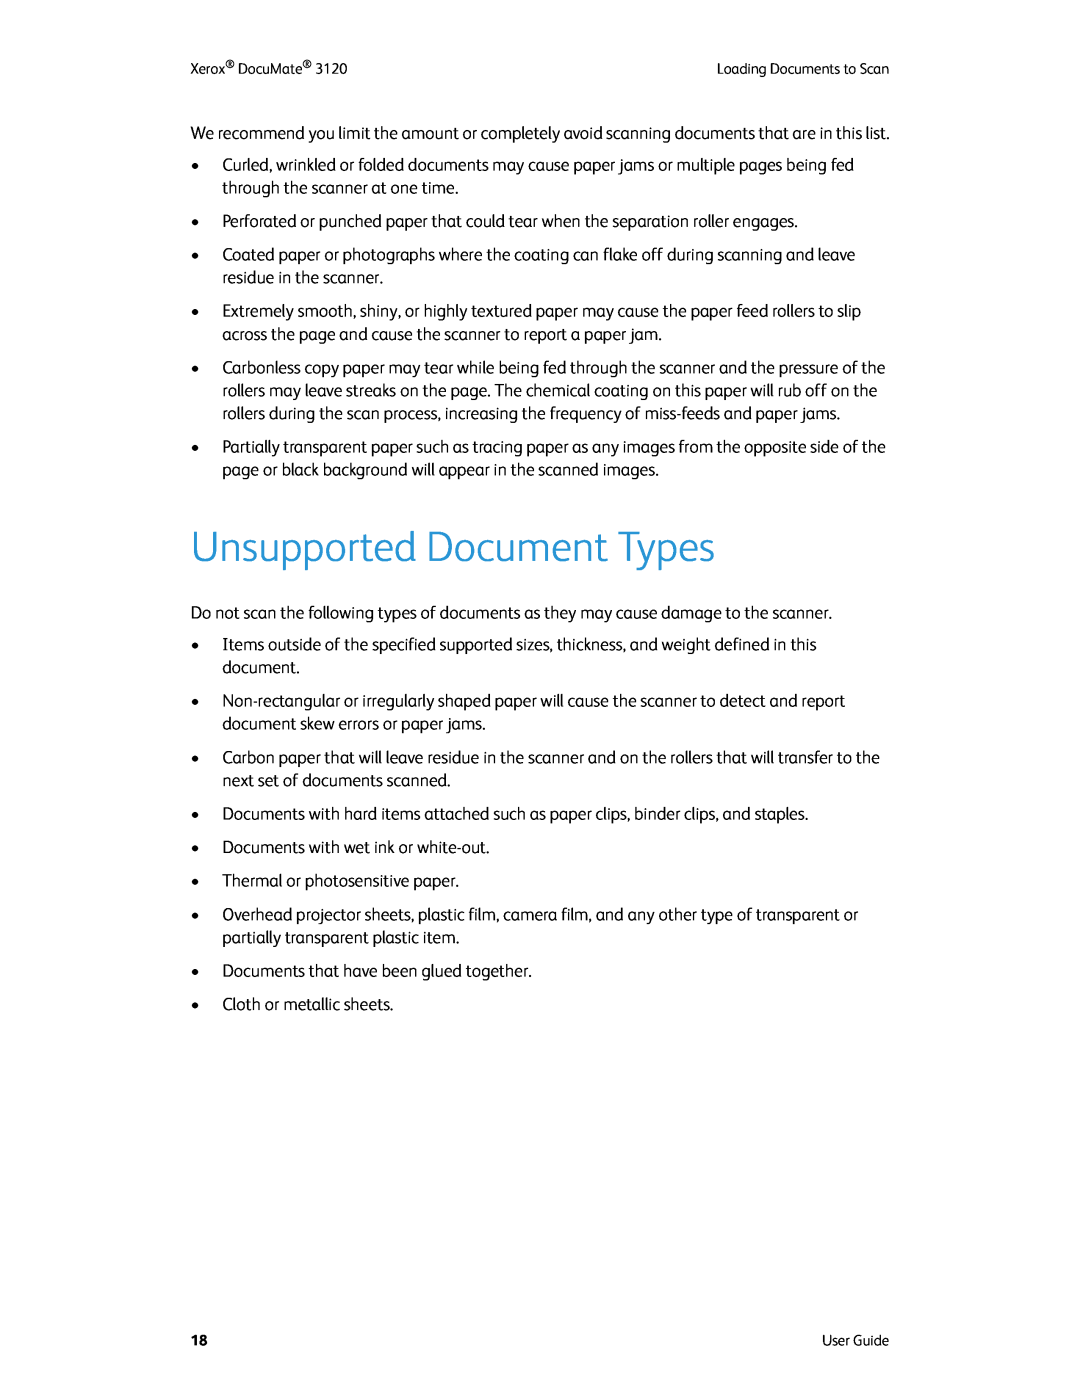 Xerox xerox manual Unsupported Document Types 